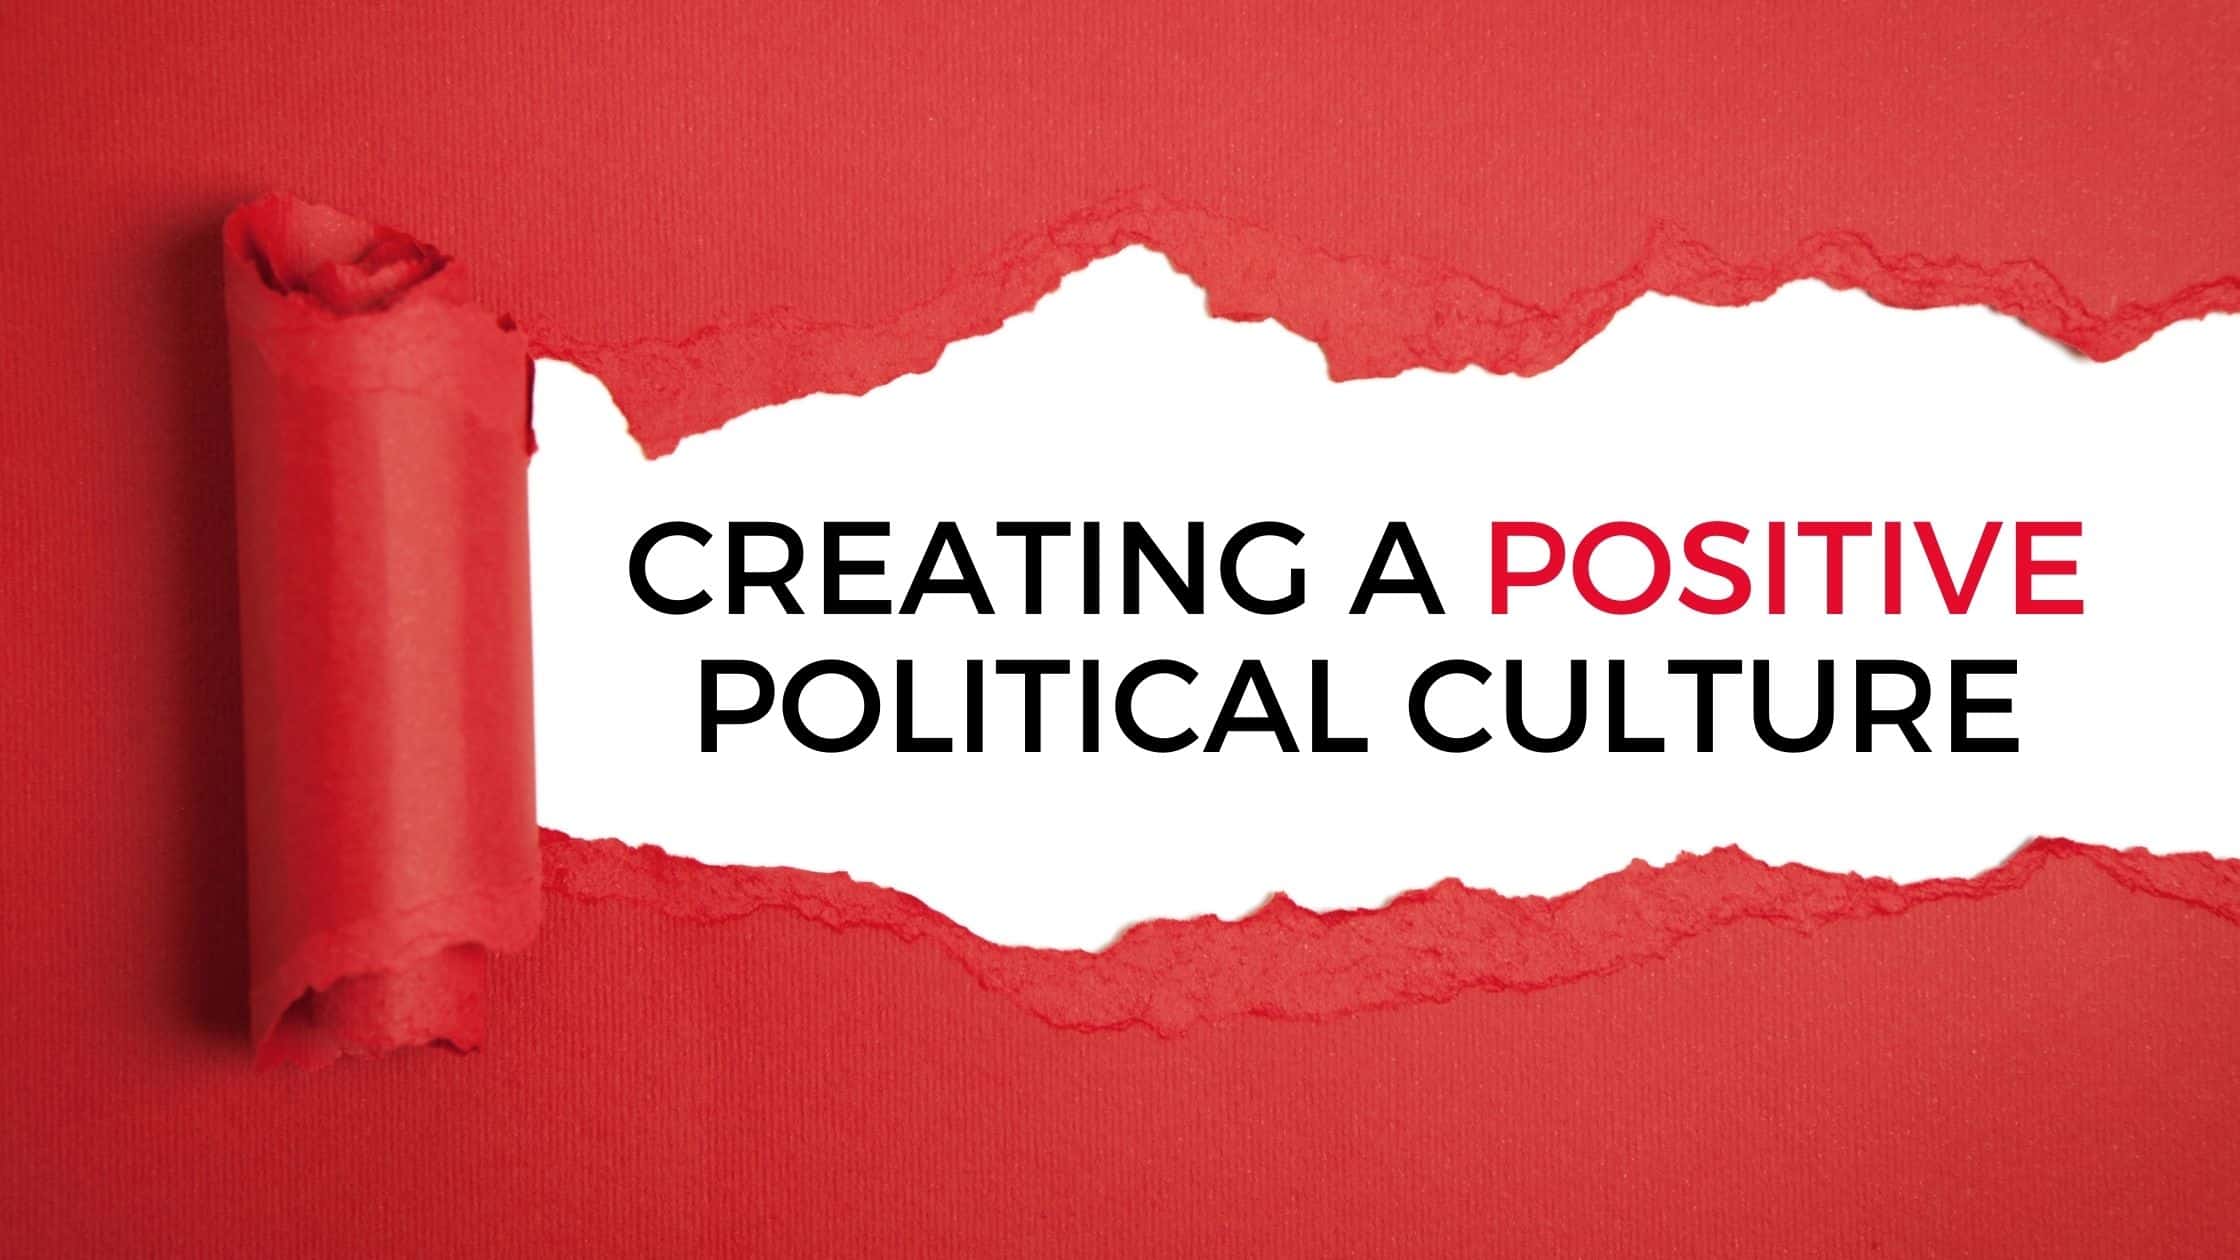 Strategies for Creating a Positive Political Culture